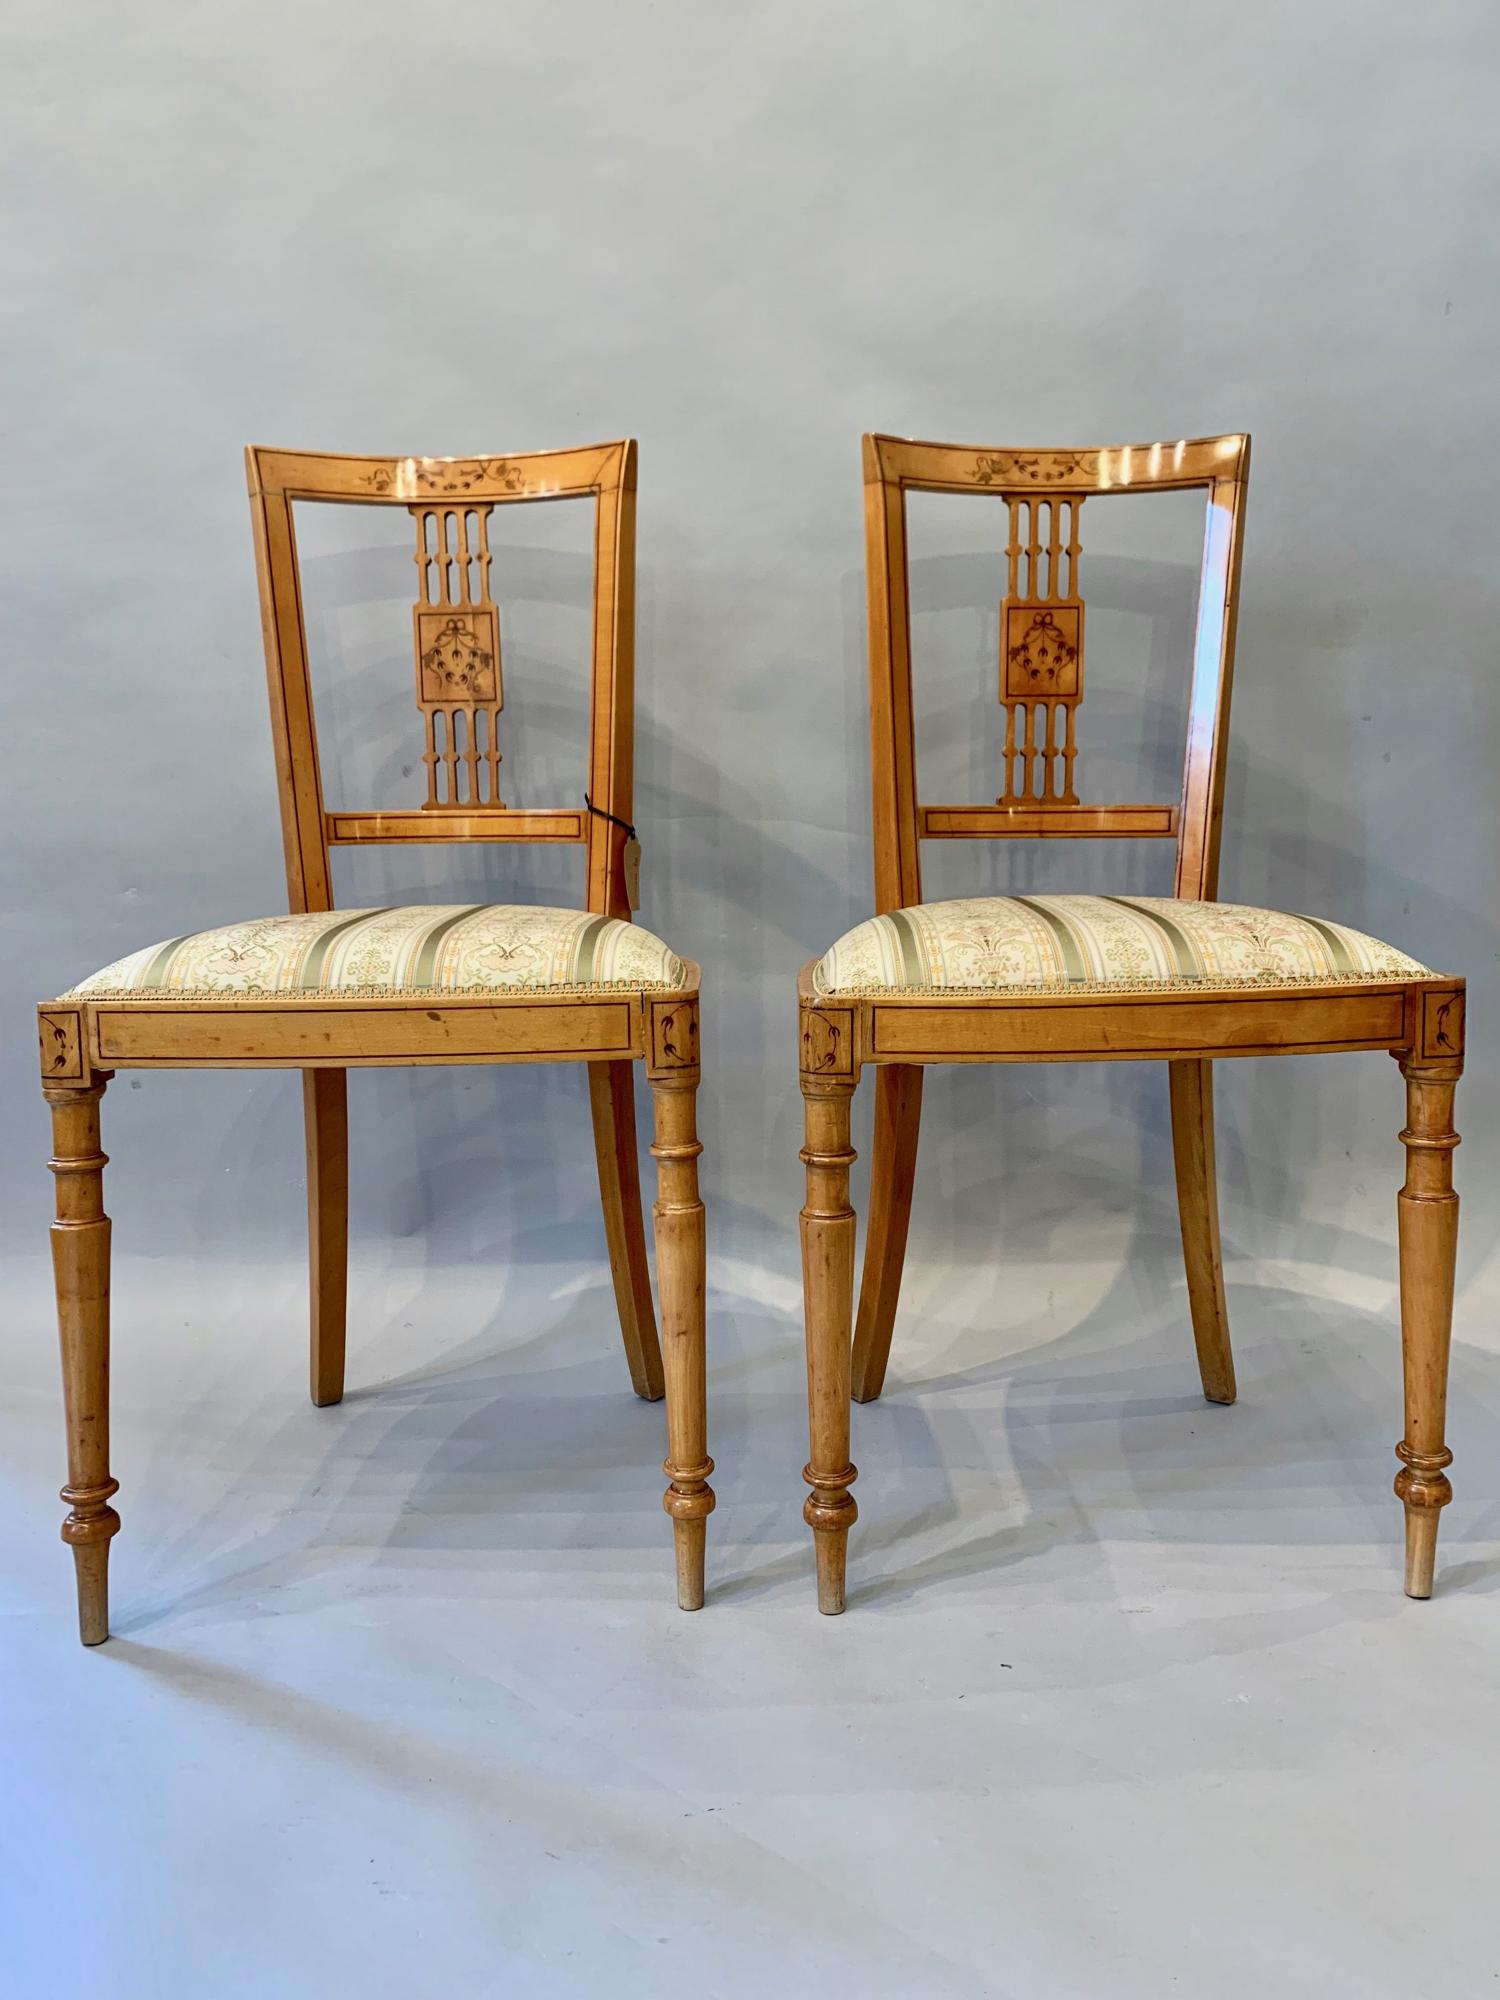 Pair of Italian inlaid marquetry side chairs